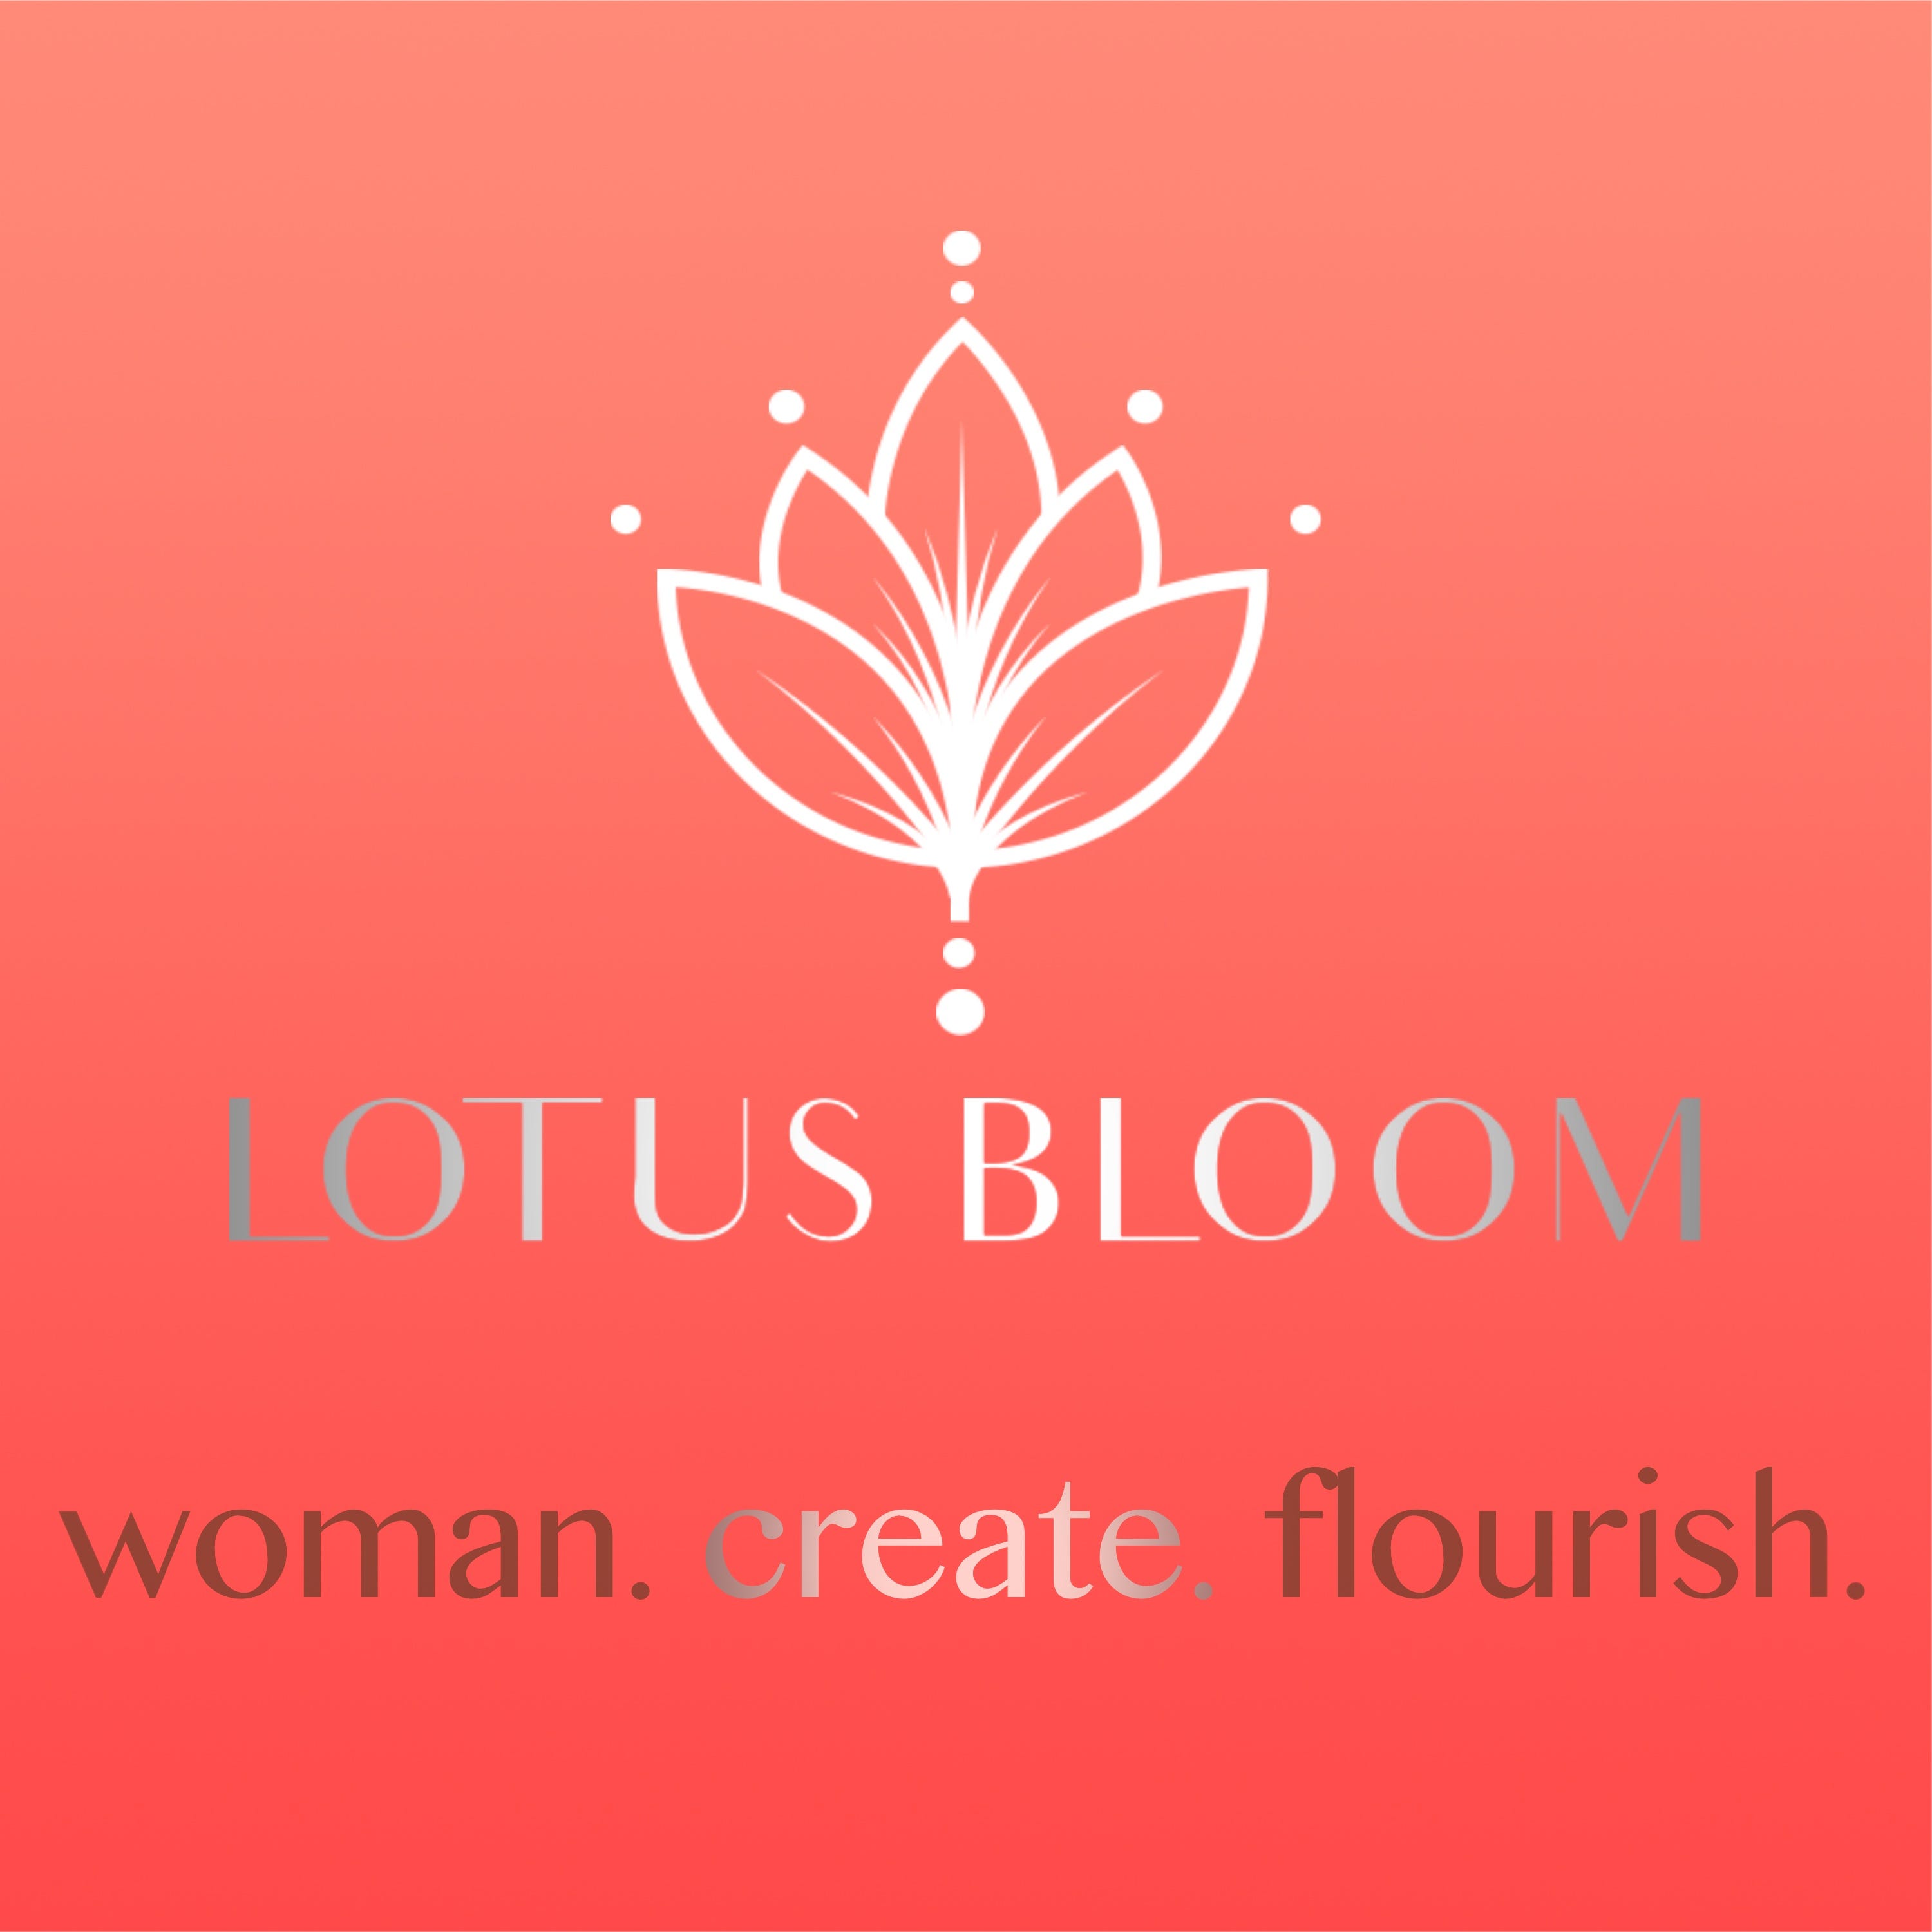 Why The Lotus? An Introduction to the Lotus Bloom Podcast